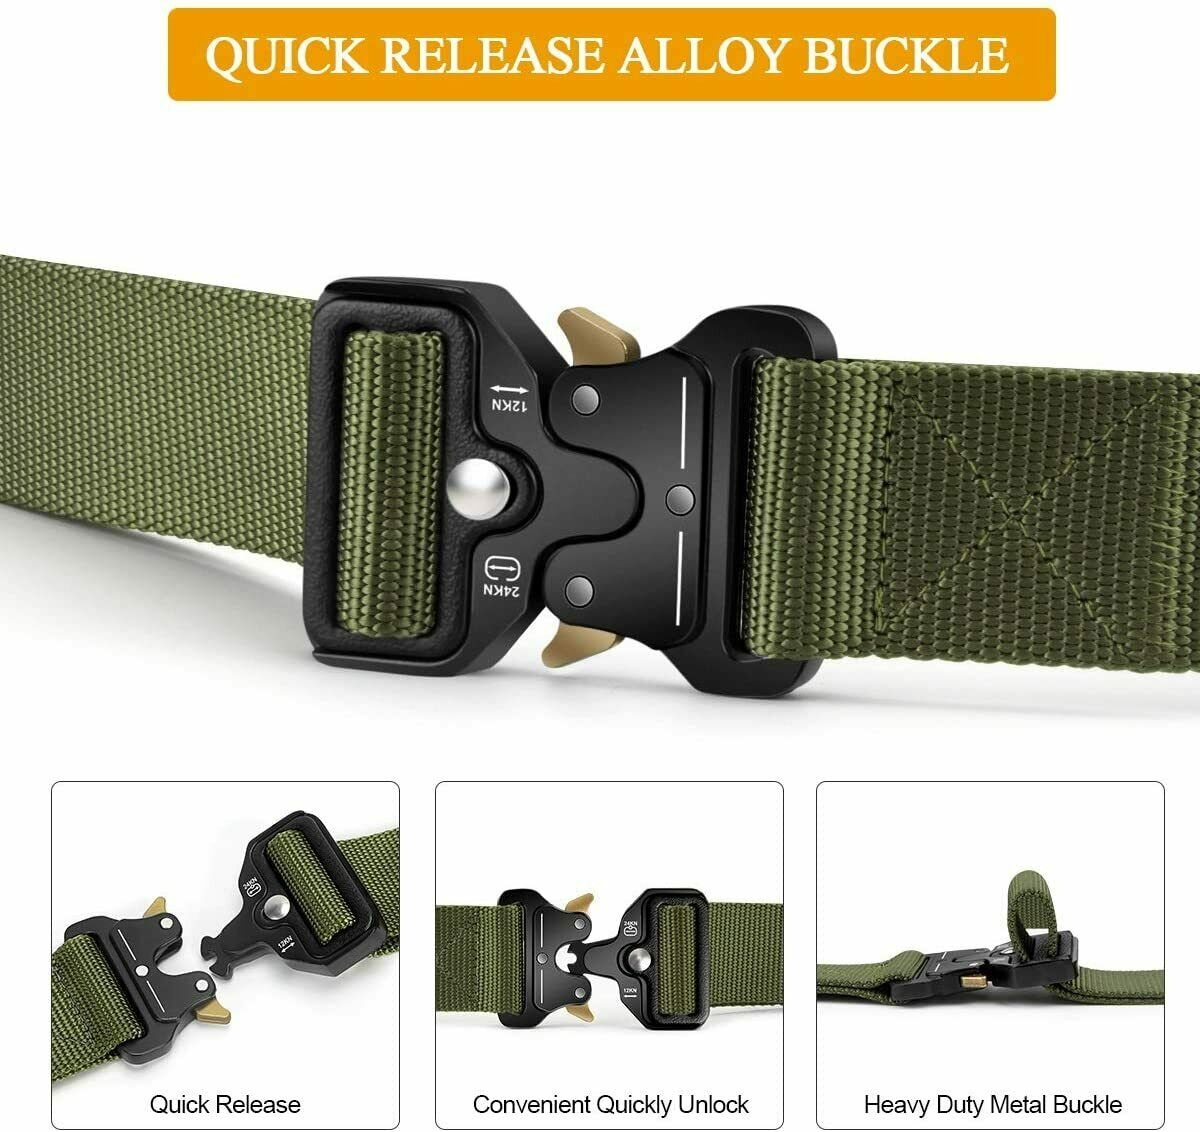 Military Tactical Belt Heavy Duty Security Working Utility Nylon Army Waistband XH